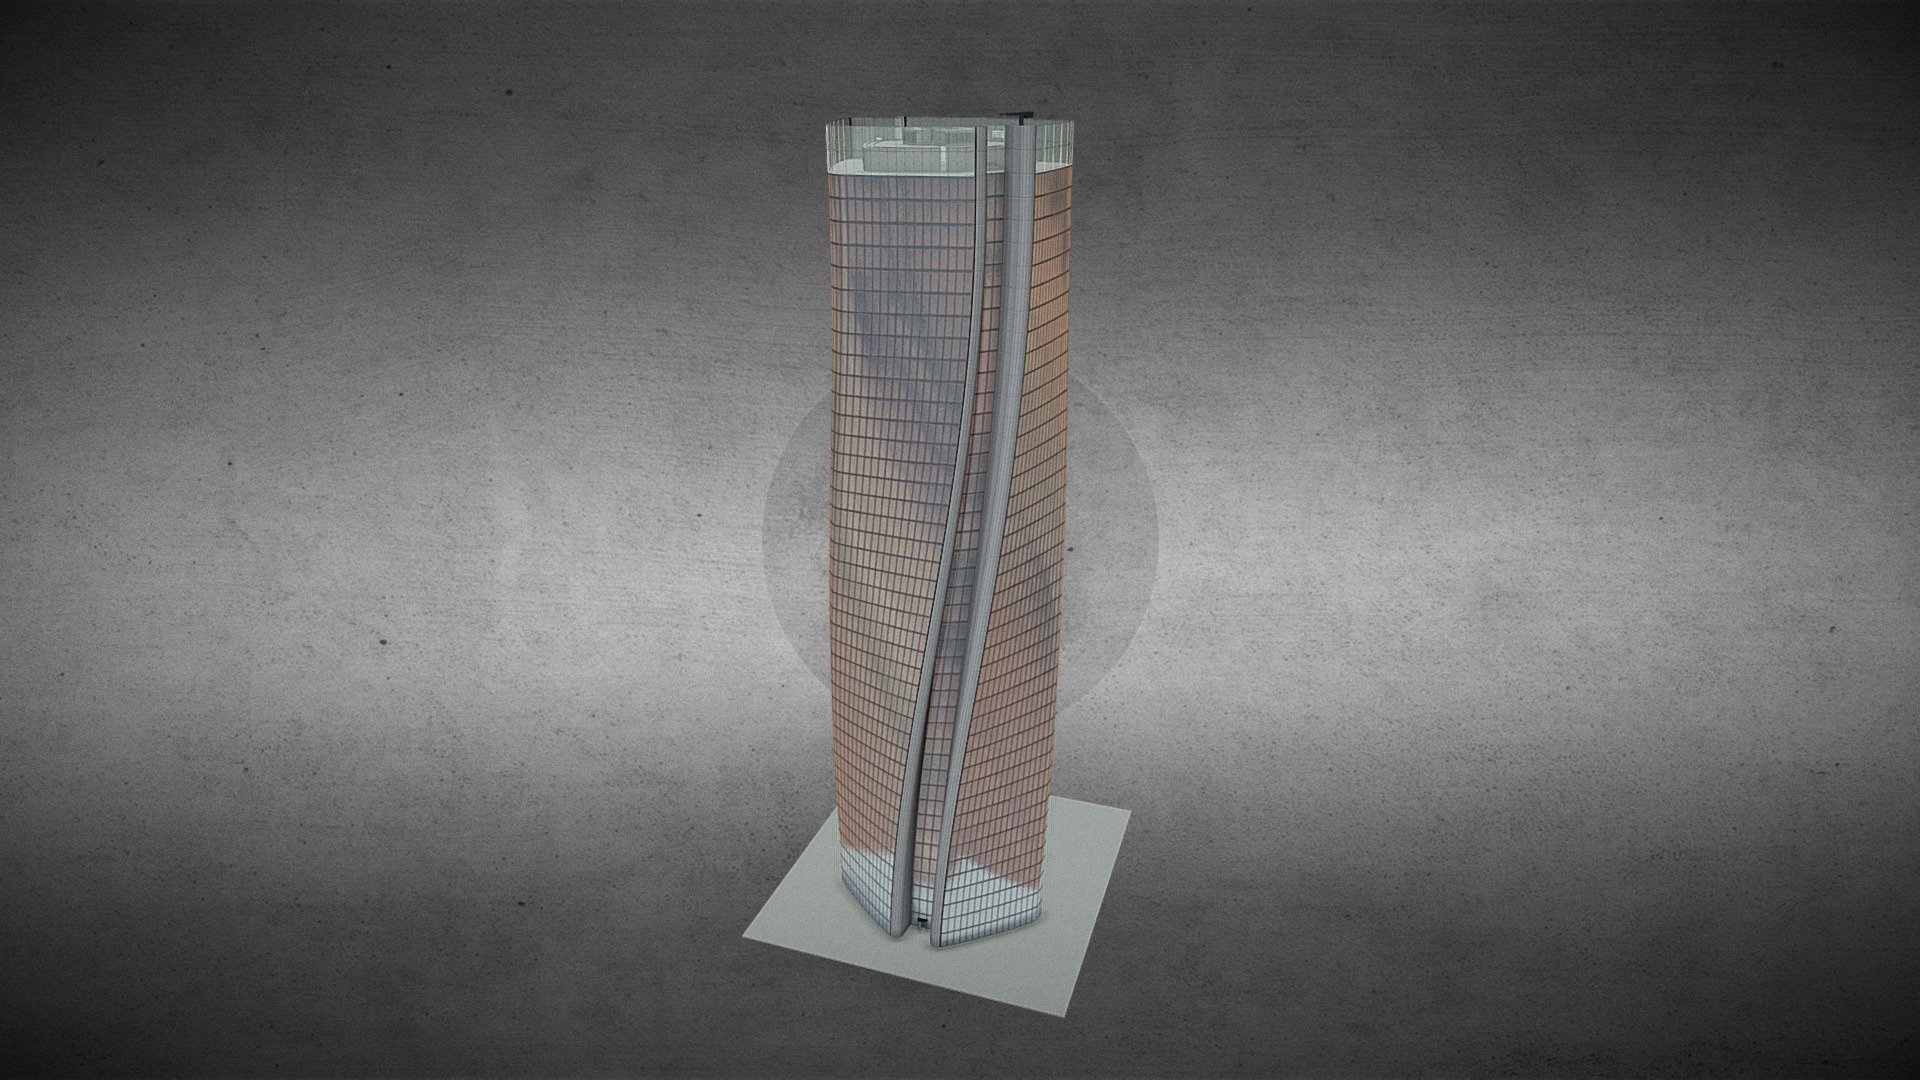 Generali Tower Milan

Created and adapted for the game &ldquo;Cities Skylines&ldquo;

The &ldquo;Generali Tower